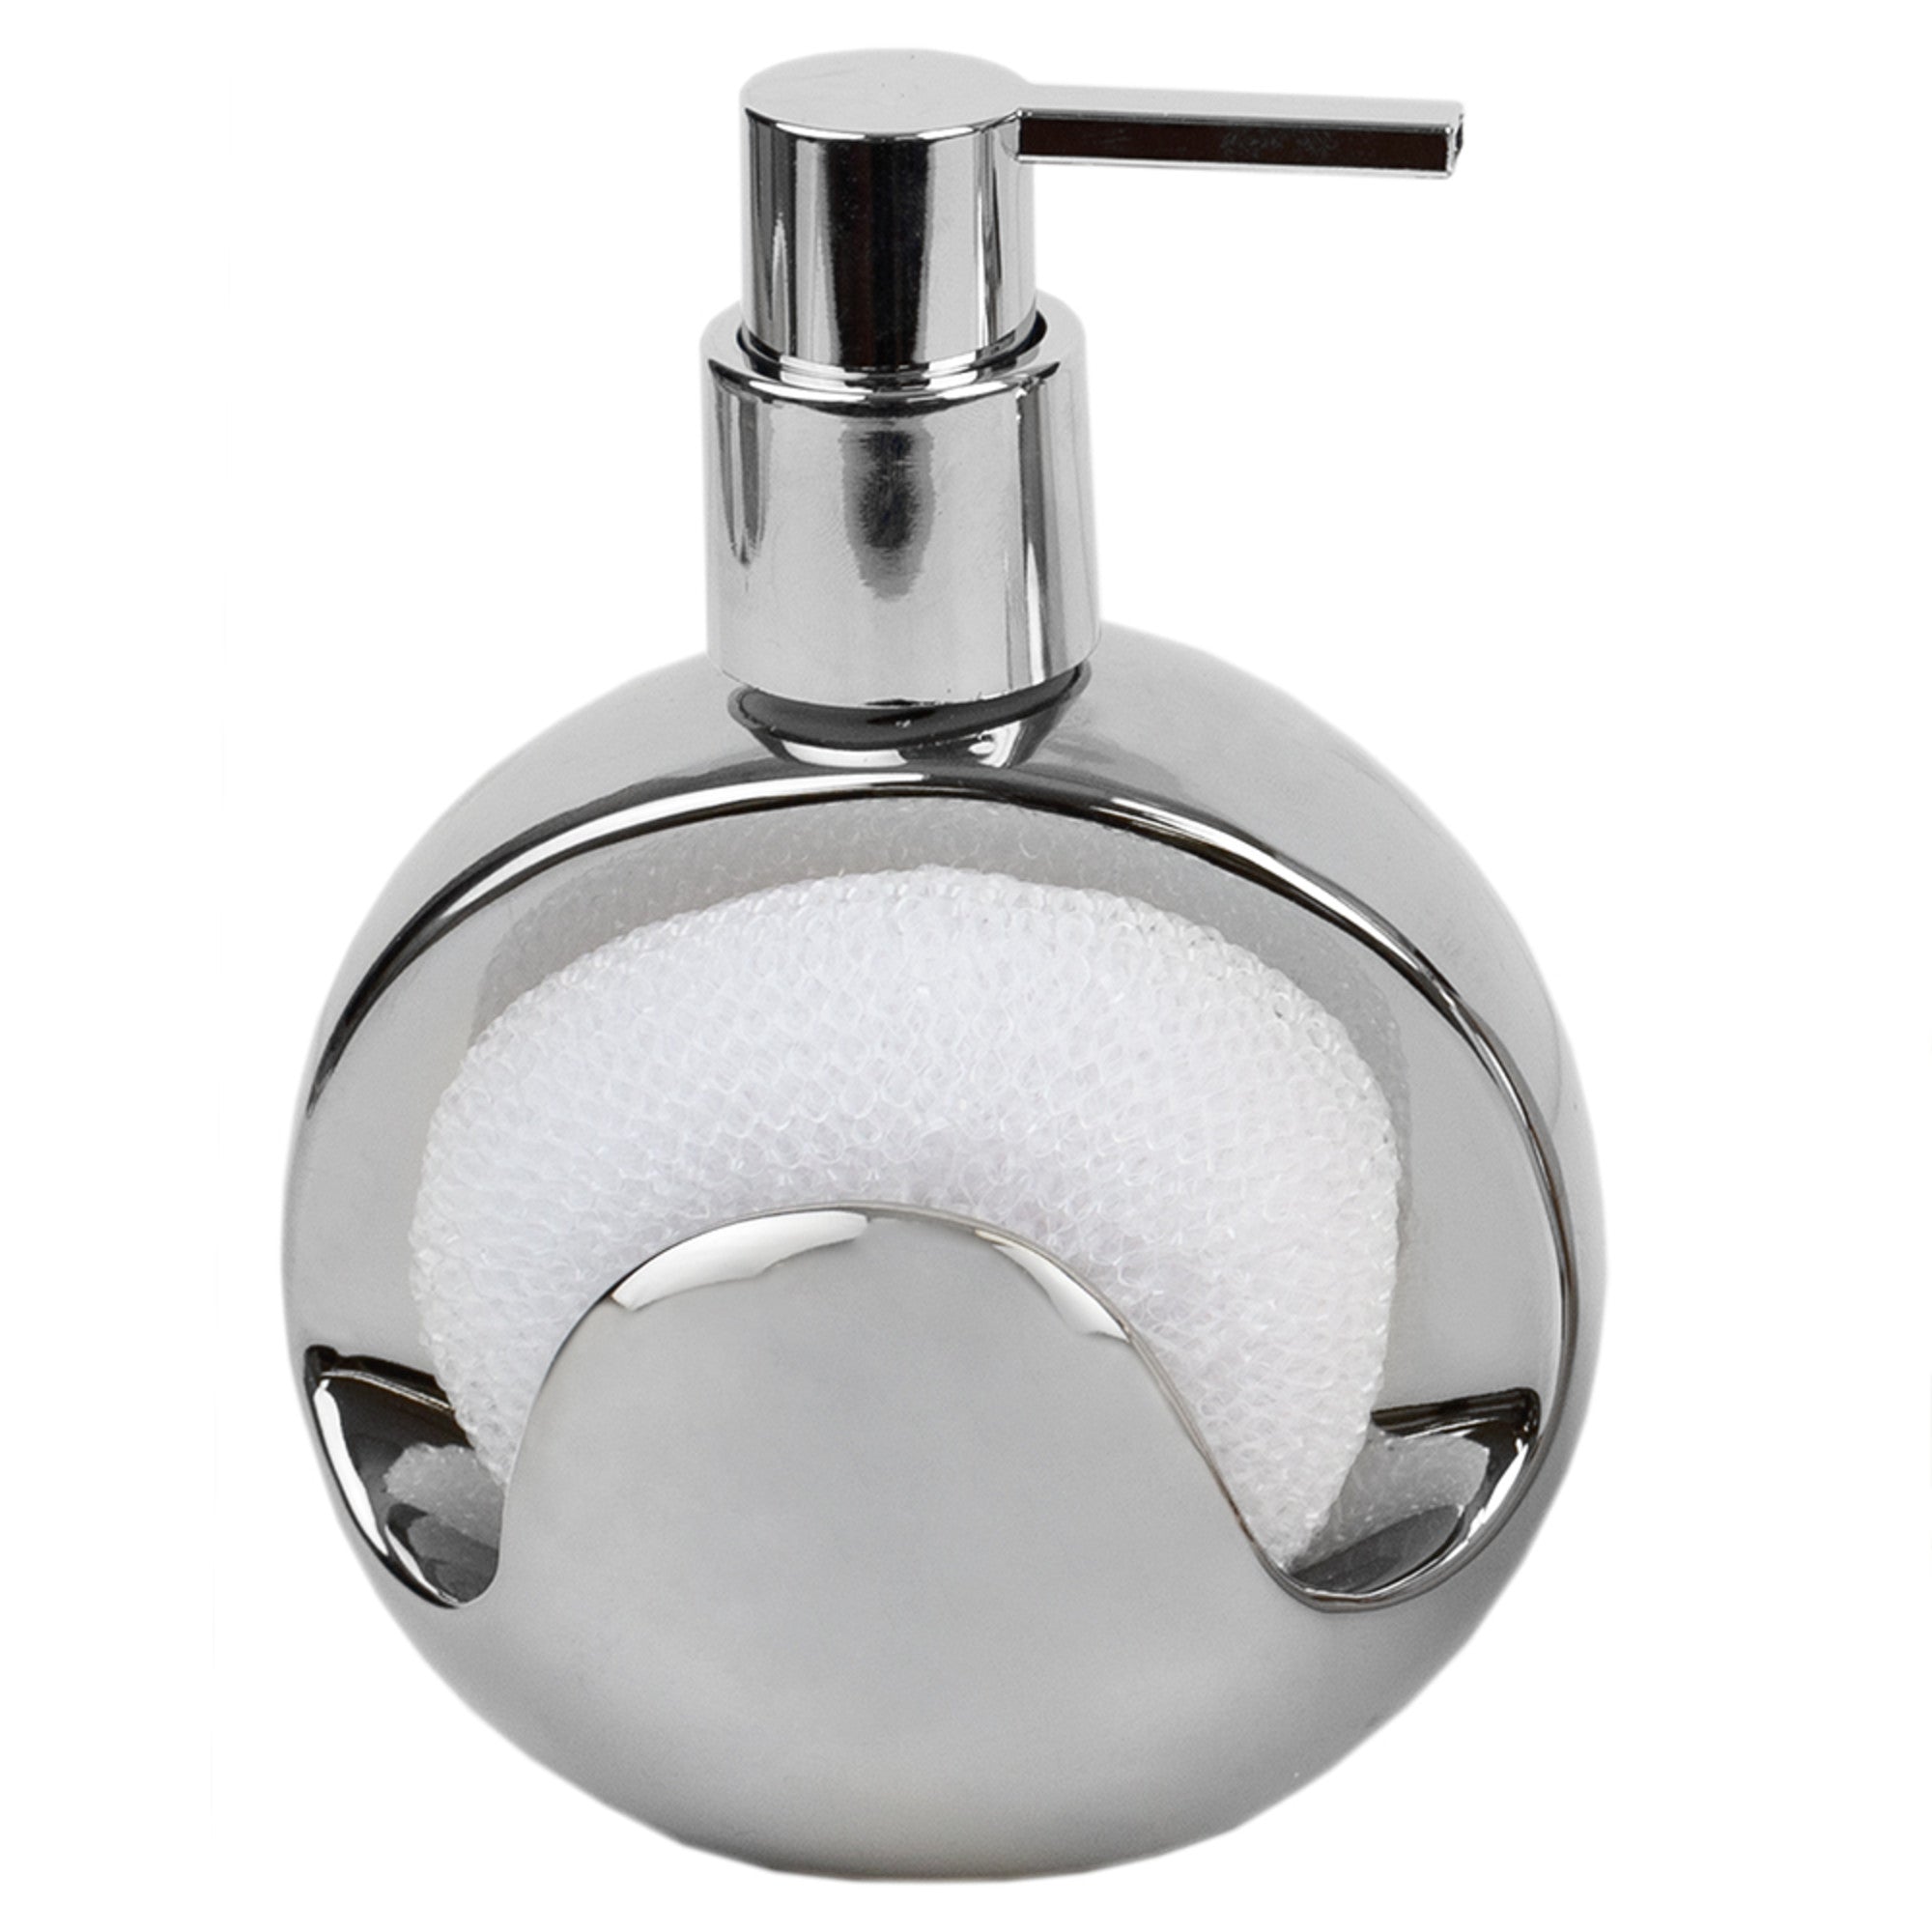 Home Basics Cosmic Ceramic Soap Dispenser with Steel Top and Fixed Sponge Holder, Silver - Silver